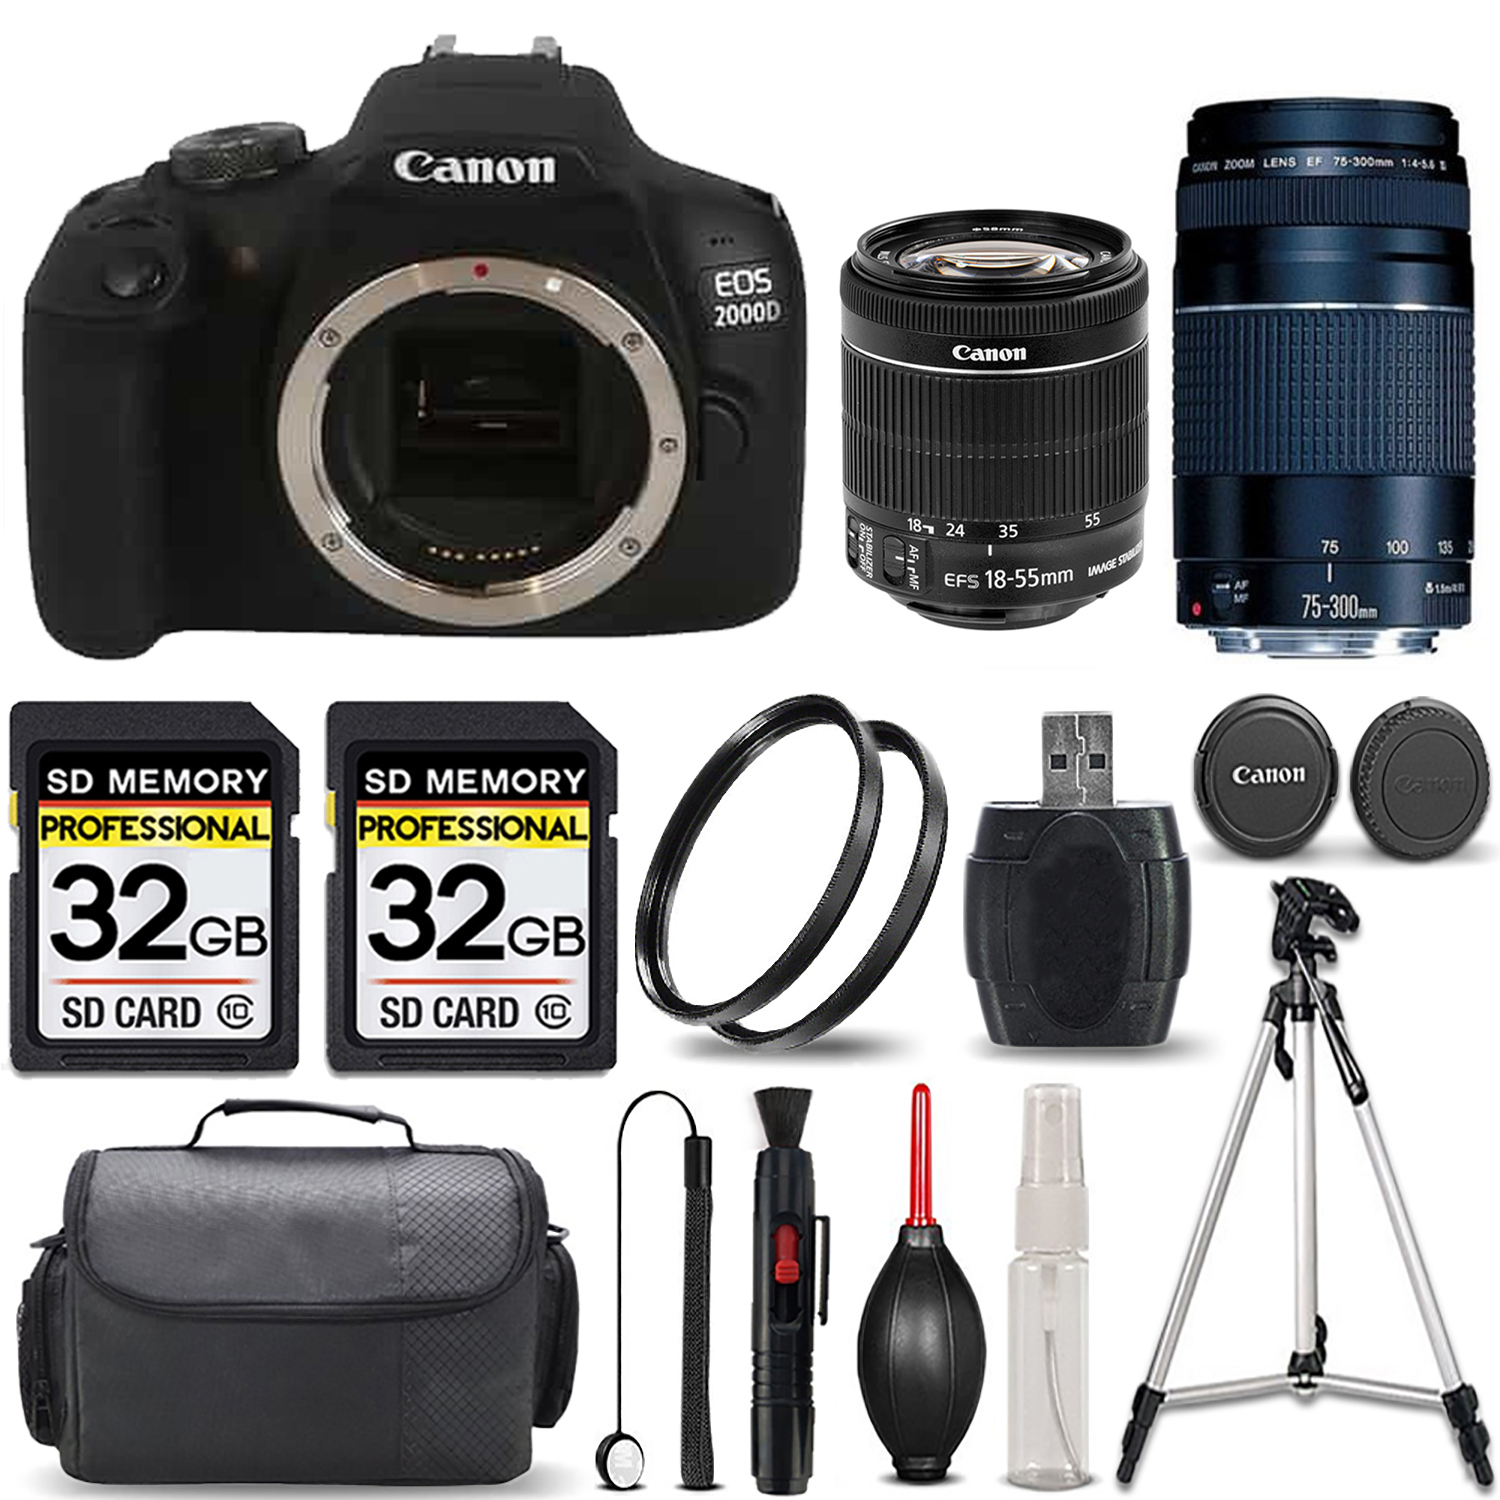 EOS 2000D (Rebel T7) Camera + 18-55mm STM Lens + Canon EF 75- 300mm III Lens *FREE SHIPPING*